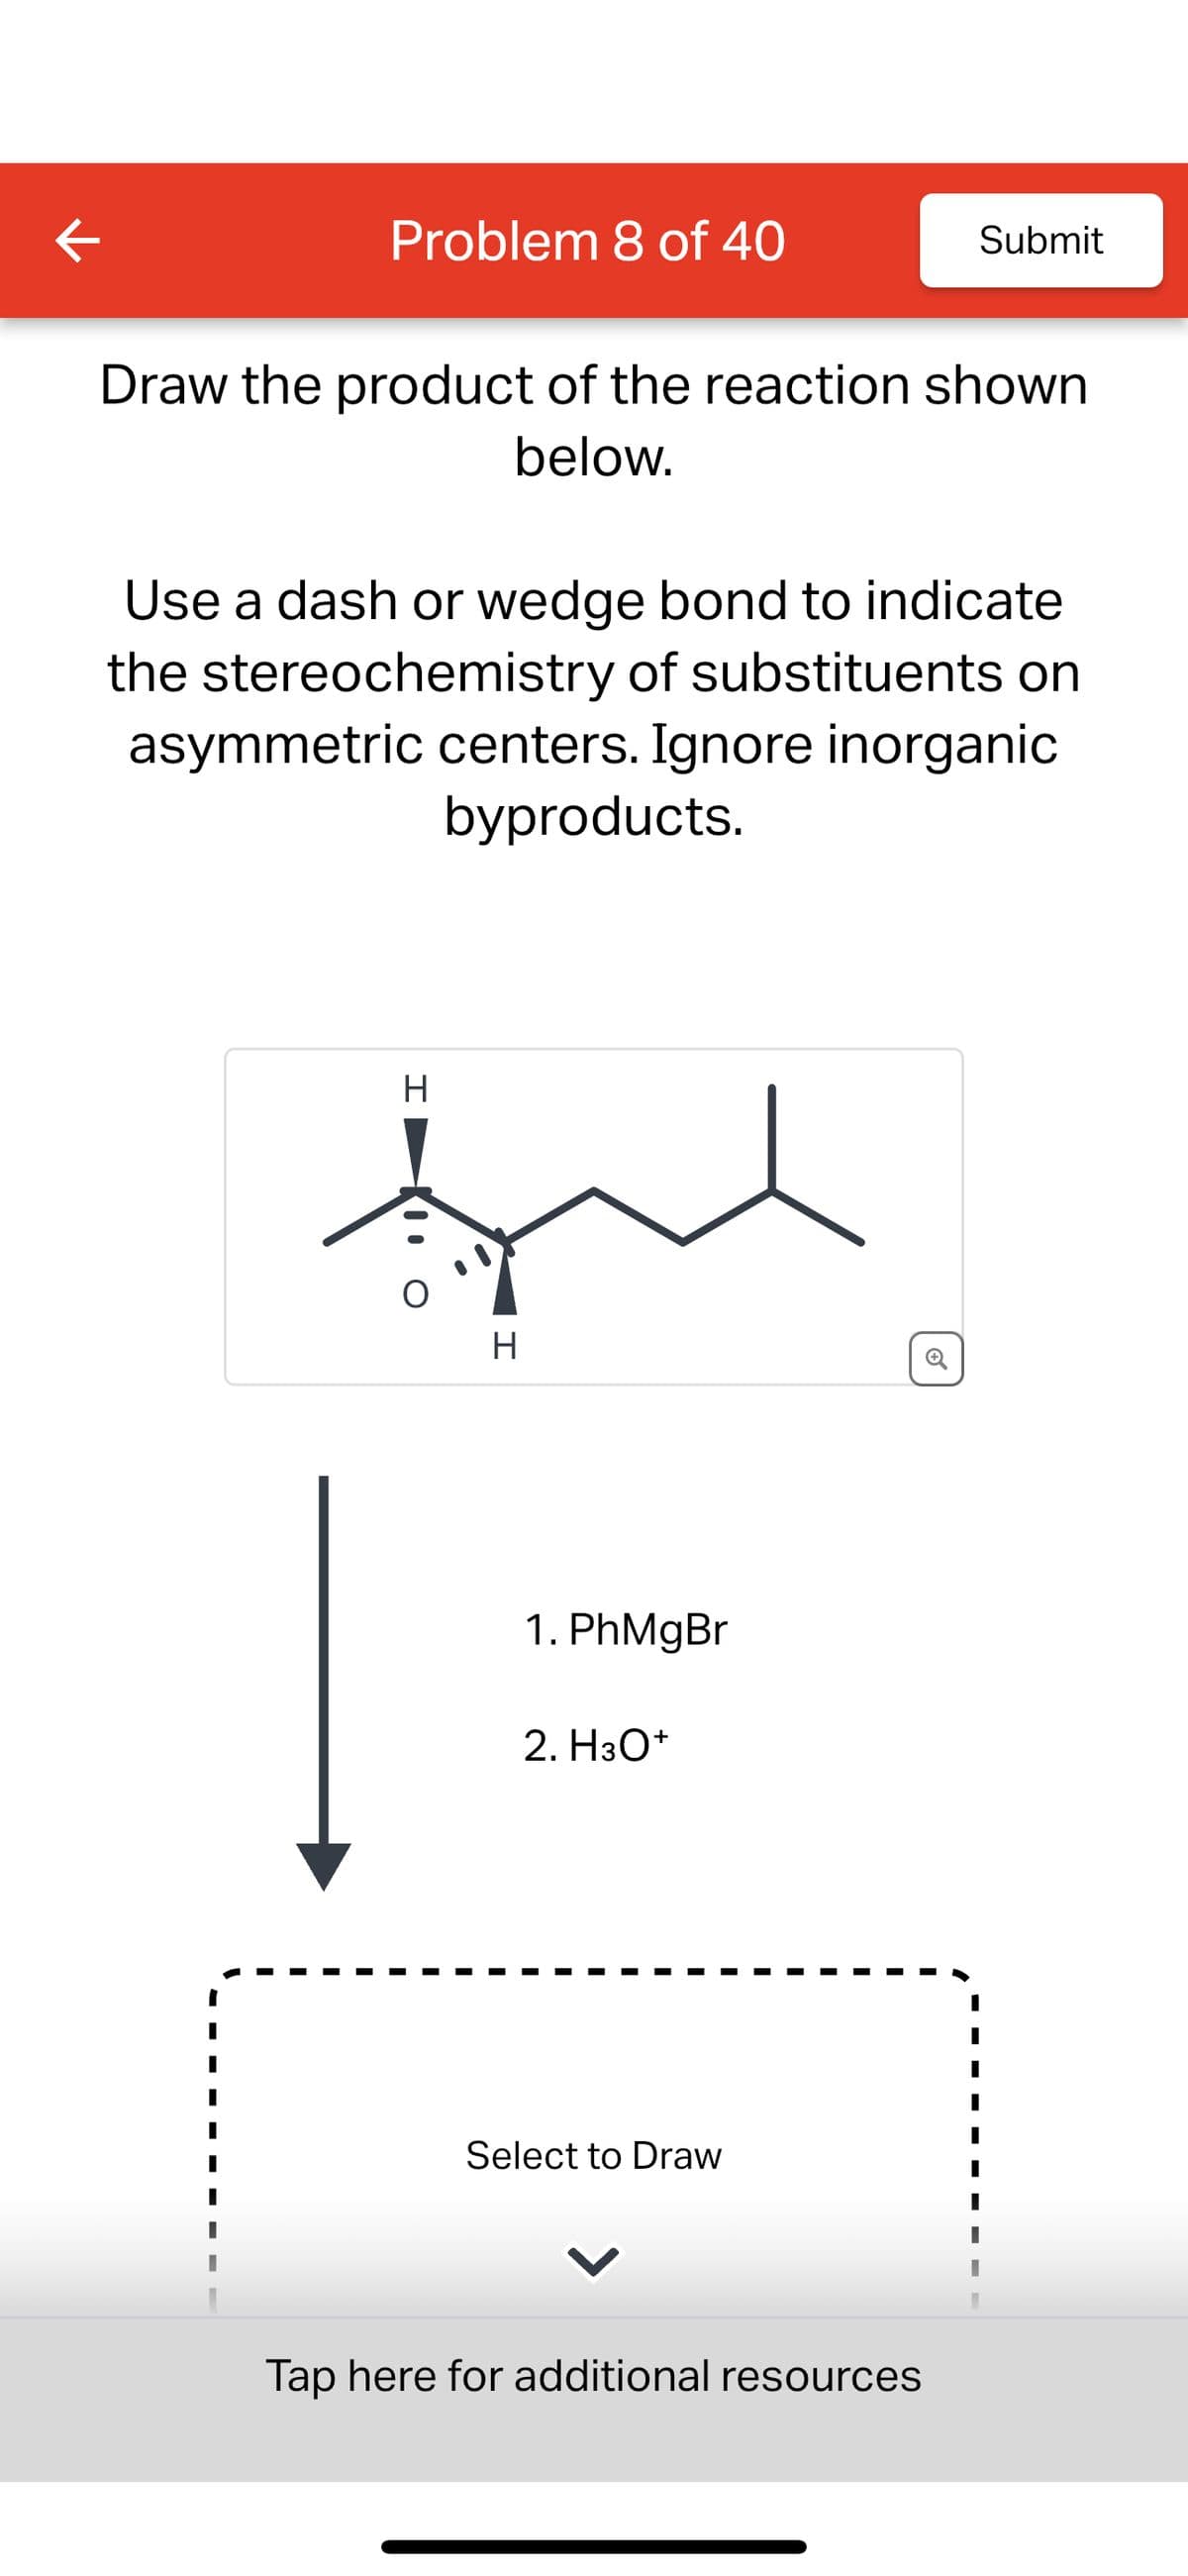 K
Problem 8 of 40
Submit
Draw the product of the reaction shown
below.
Use a dash or wedge bond to indicate
the stereochemistry of substituents on
asymmetric centers. Ignore inorganic
byproducts.
H
H
1. PhMgBr
2. H3O+
Select to Draw
Tap here for additional resources